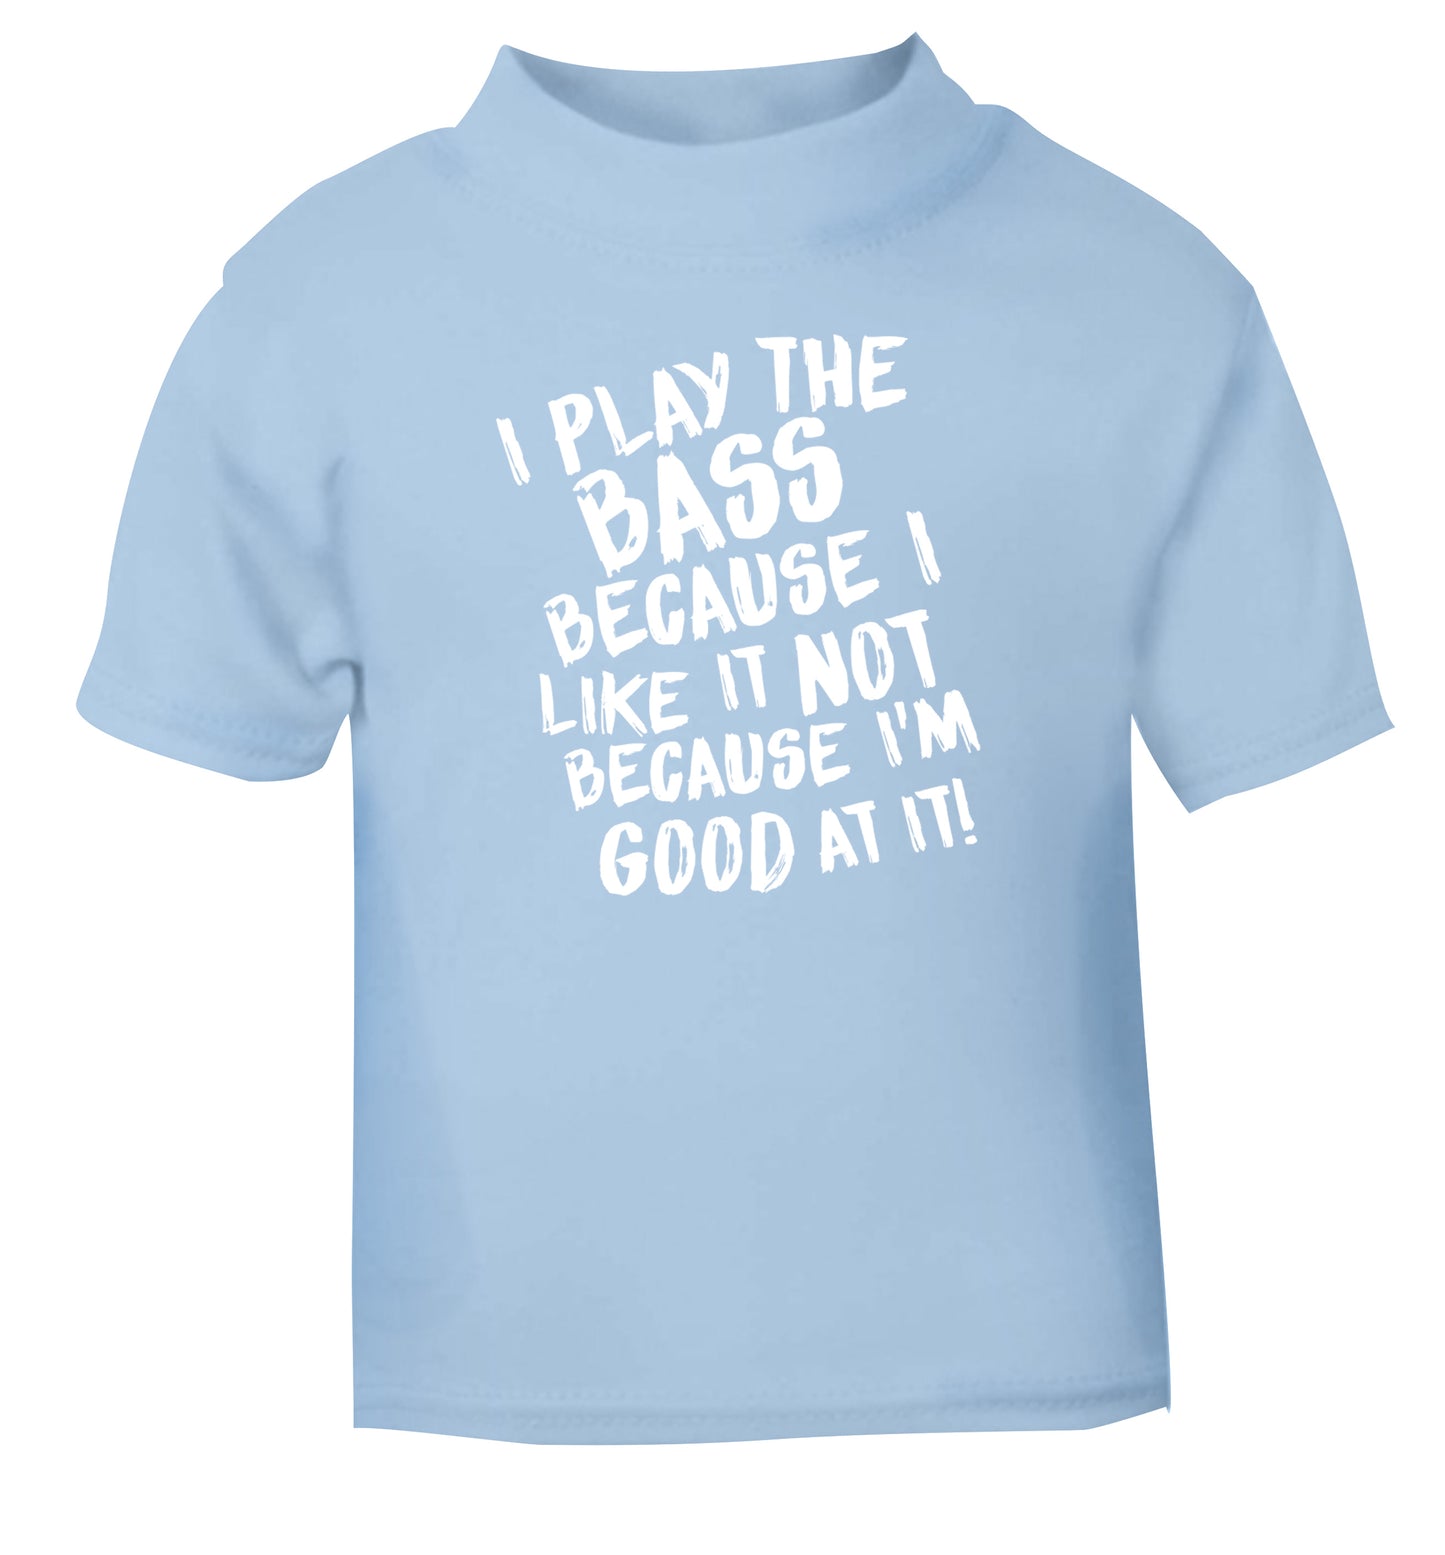 I play the bass because I like it not because I'm good at it light blue Baby Toddler Tshirt 2 Years